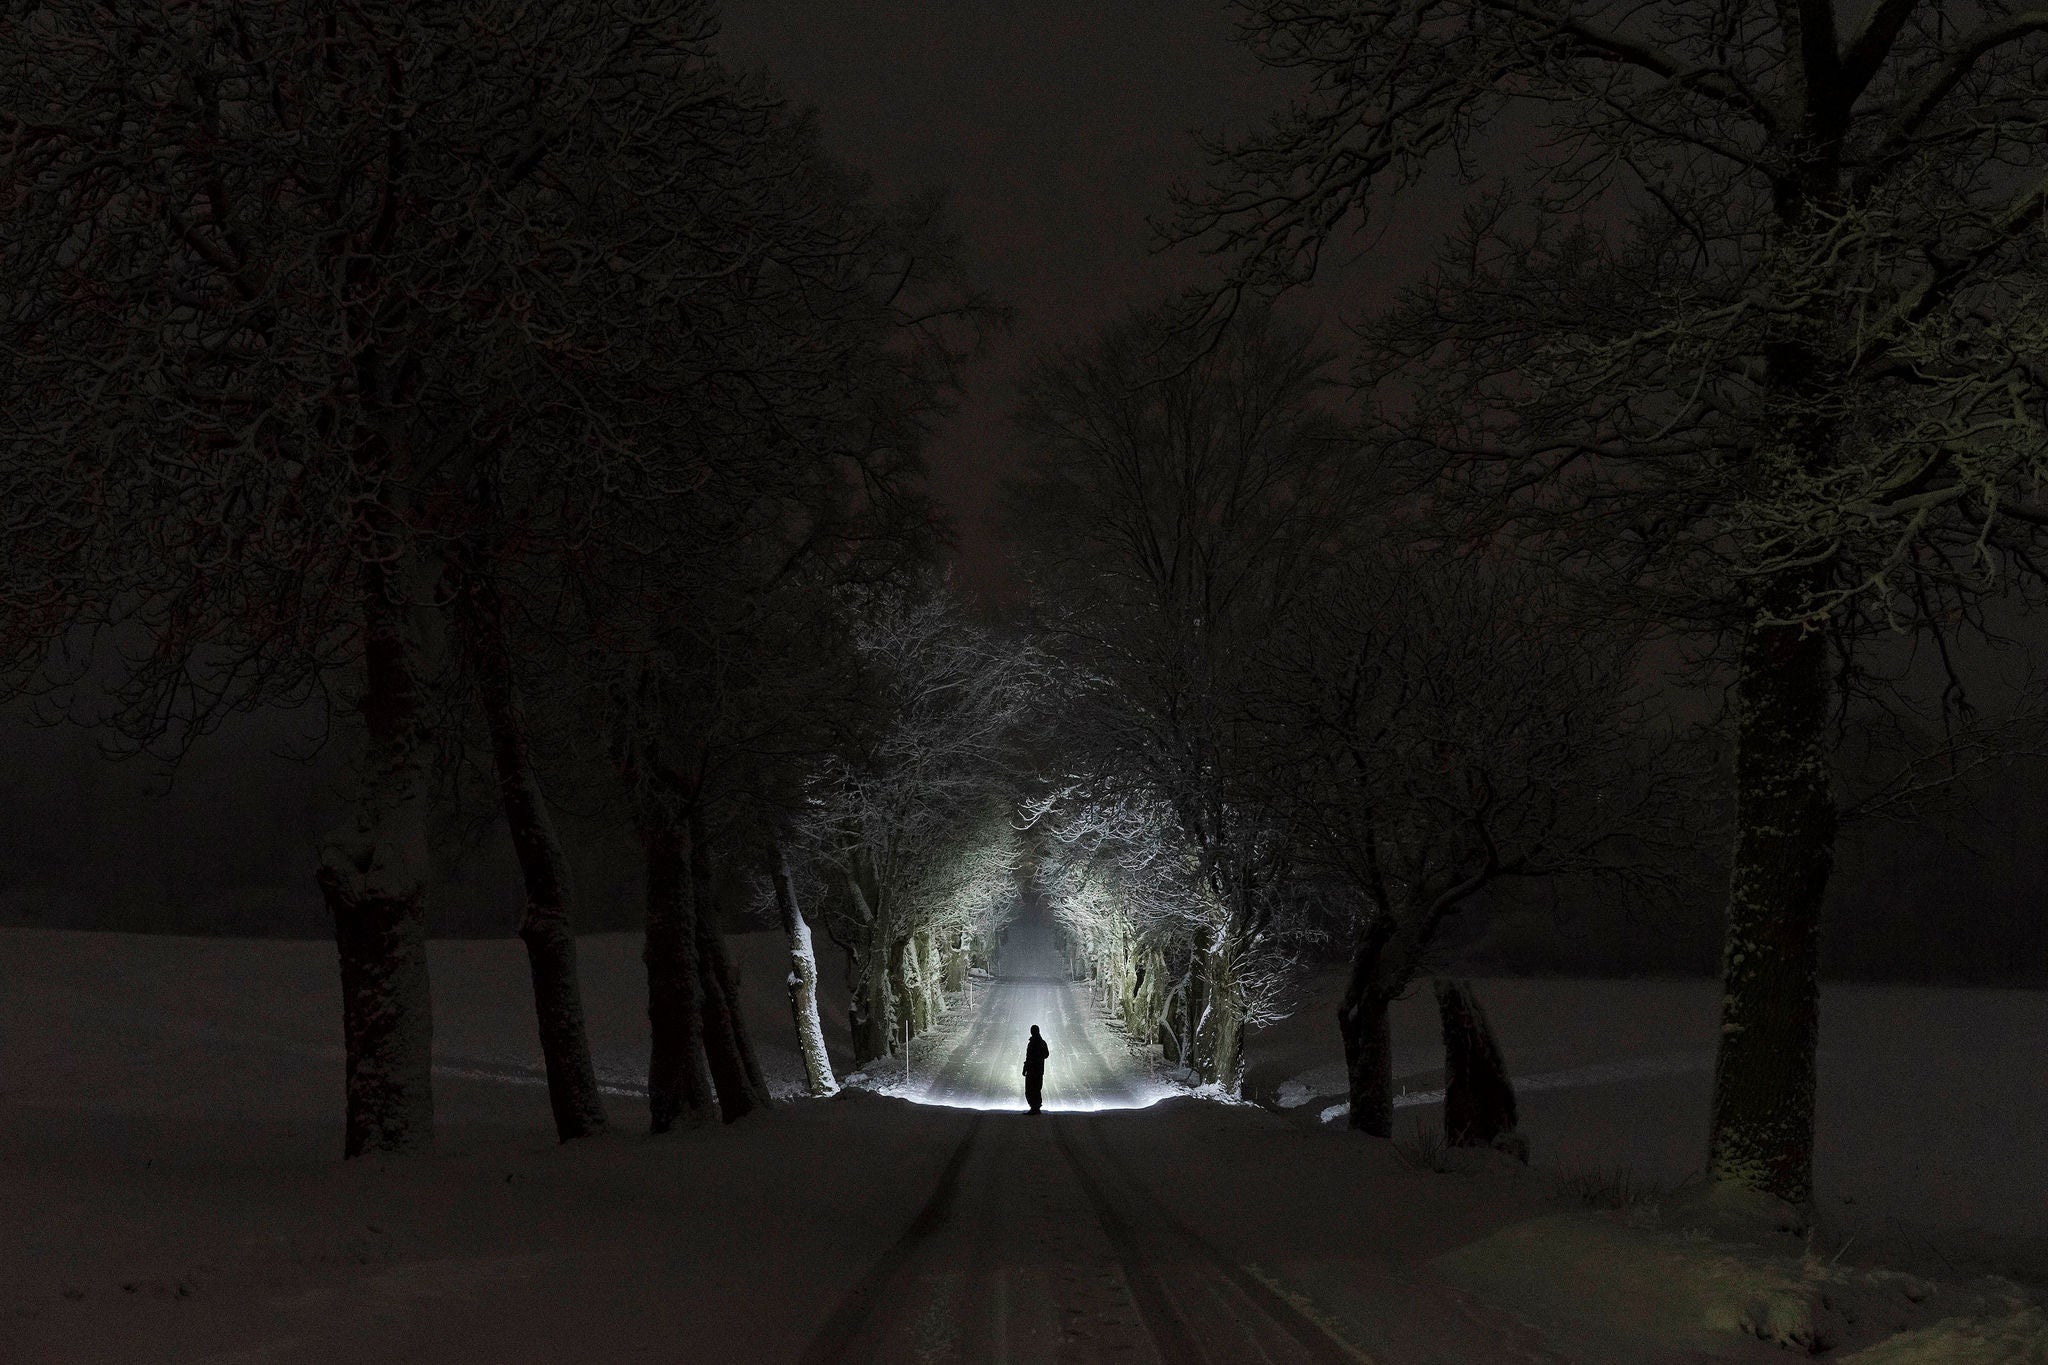 Man shining flashlight down a dark road lined with trees at night